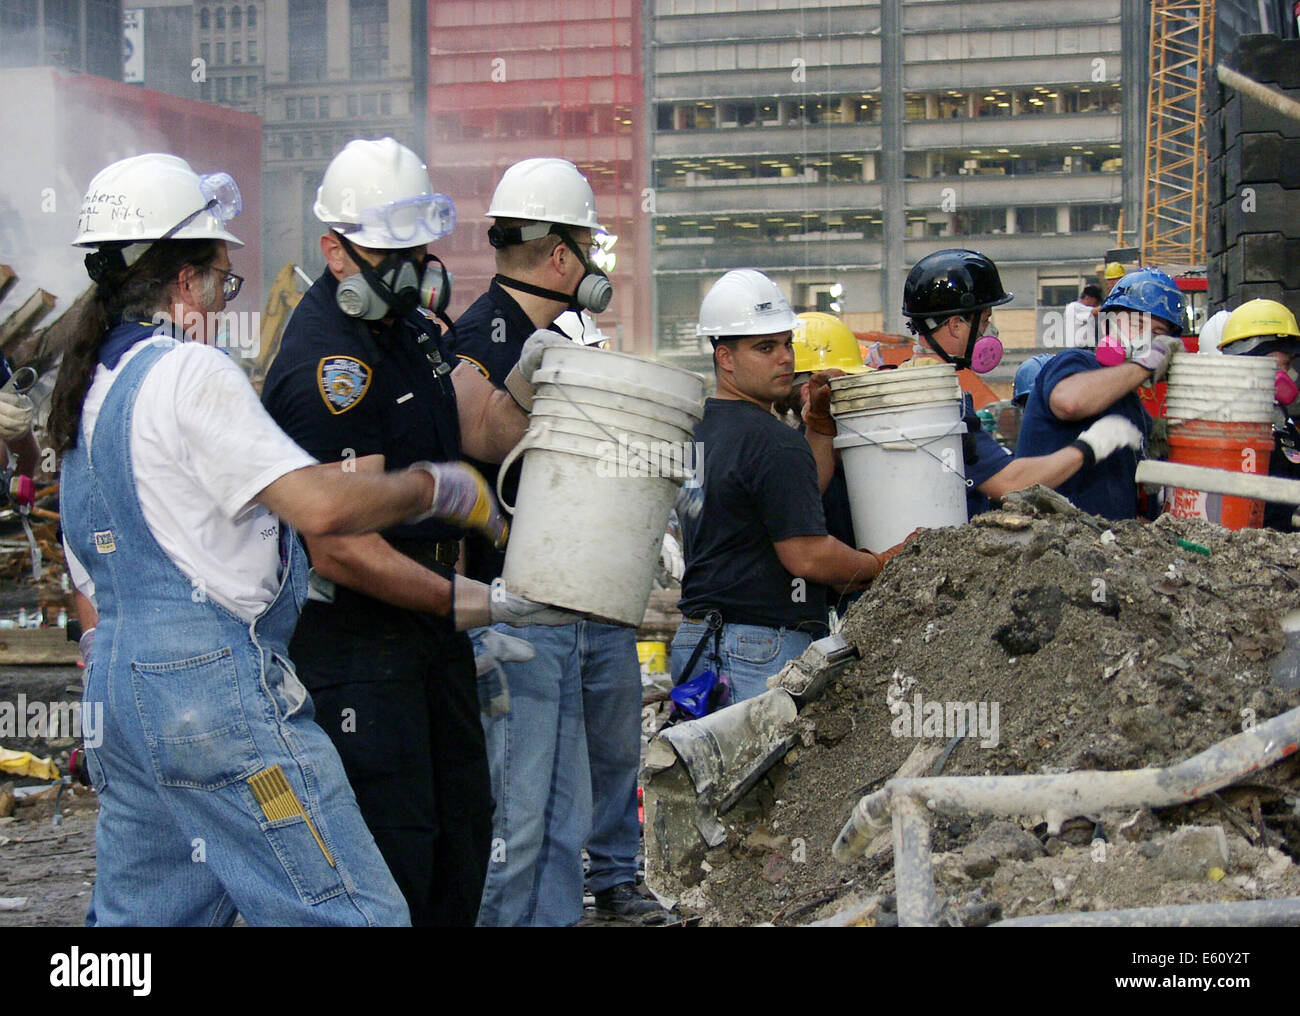 Rescue workers man a bucket brigade to remove debris from the wreckage of the World Trade Center in the aftermath of a massive terrorist attack which destroyed the twin towers killing 2,606 people September 20, 2001 in New York, NY. Stock Photo